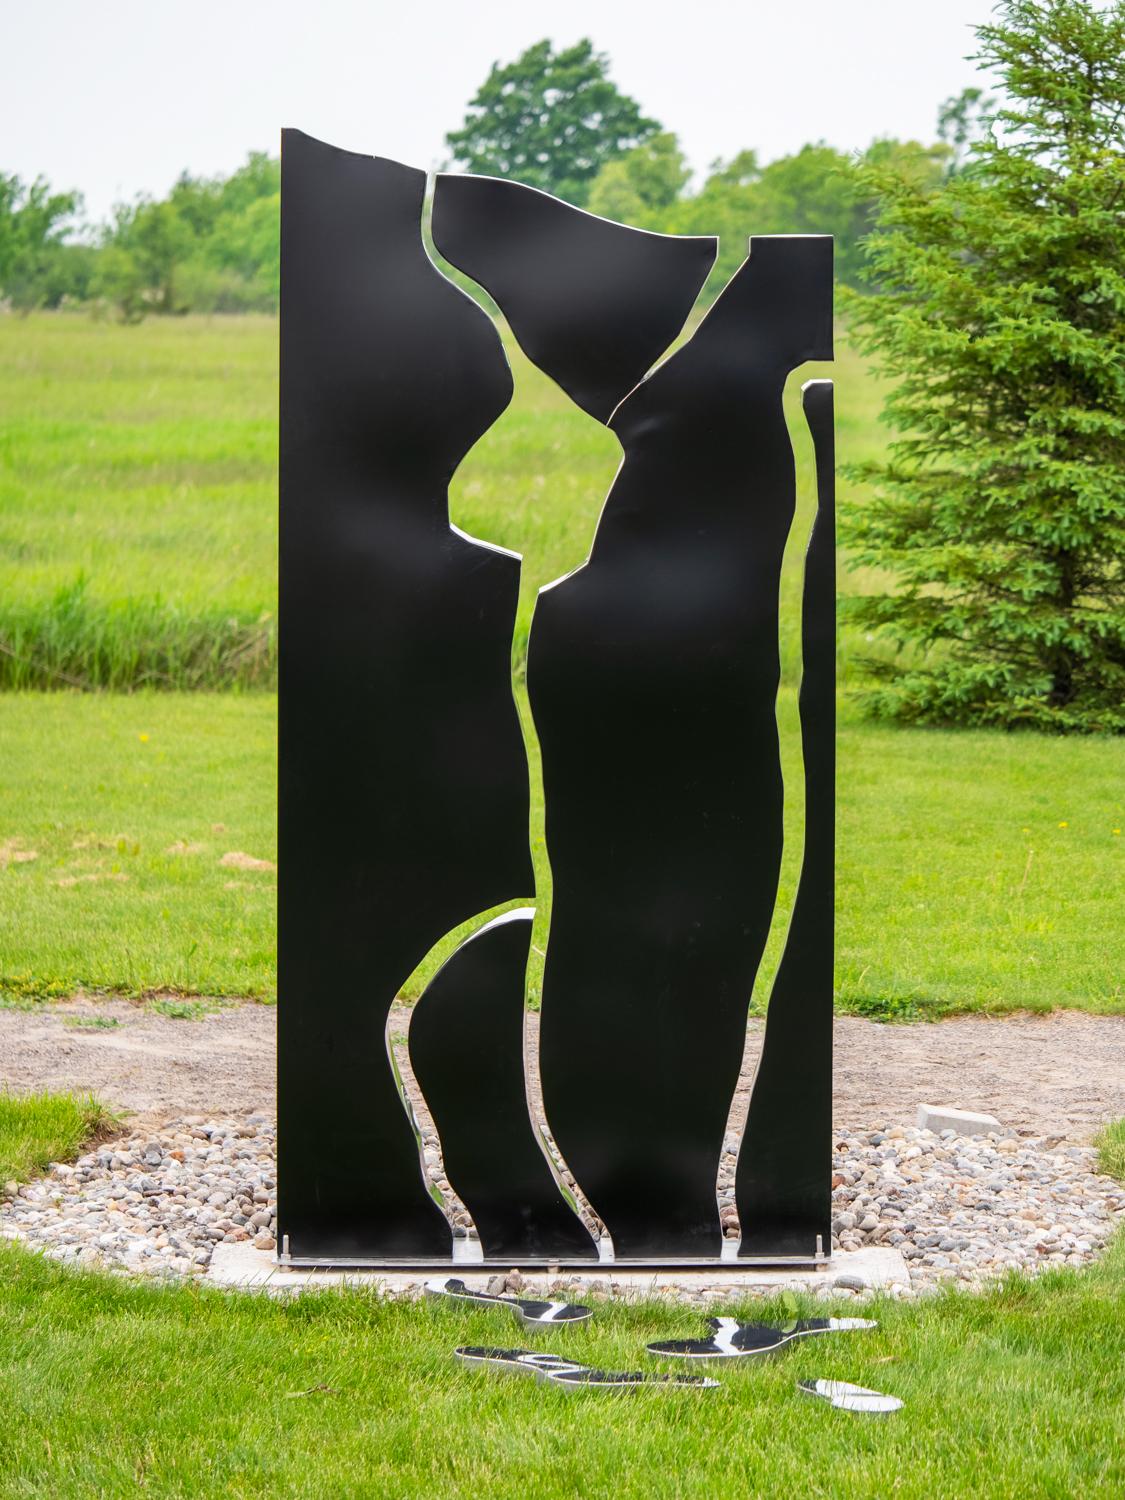 A rectangular, steel outdoor sculpture in black is divided in parts, like a puzzle, the edges polished and reflective. This sculpture Water Writing V3, titled in French as Aquagraphie Variation No 2, is an eight foot work by Quebec artist Philippe